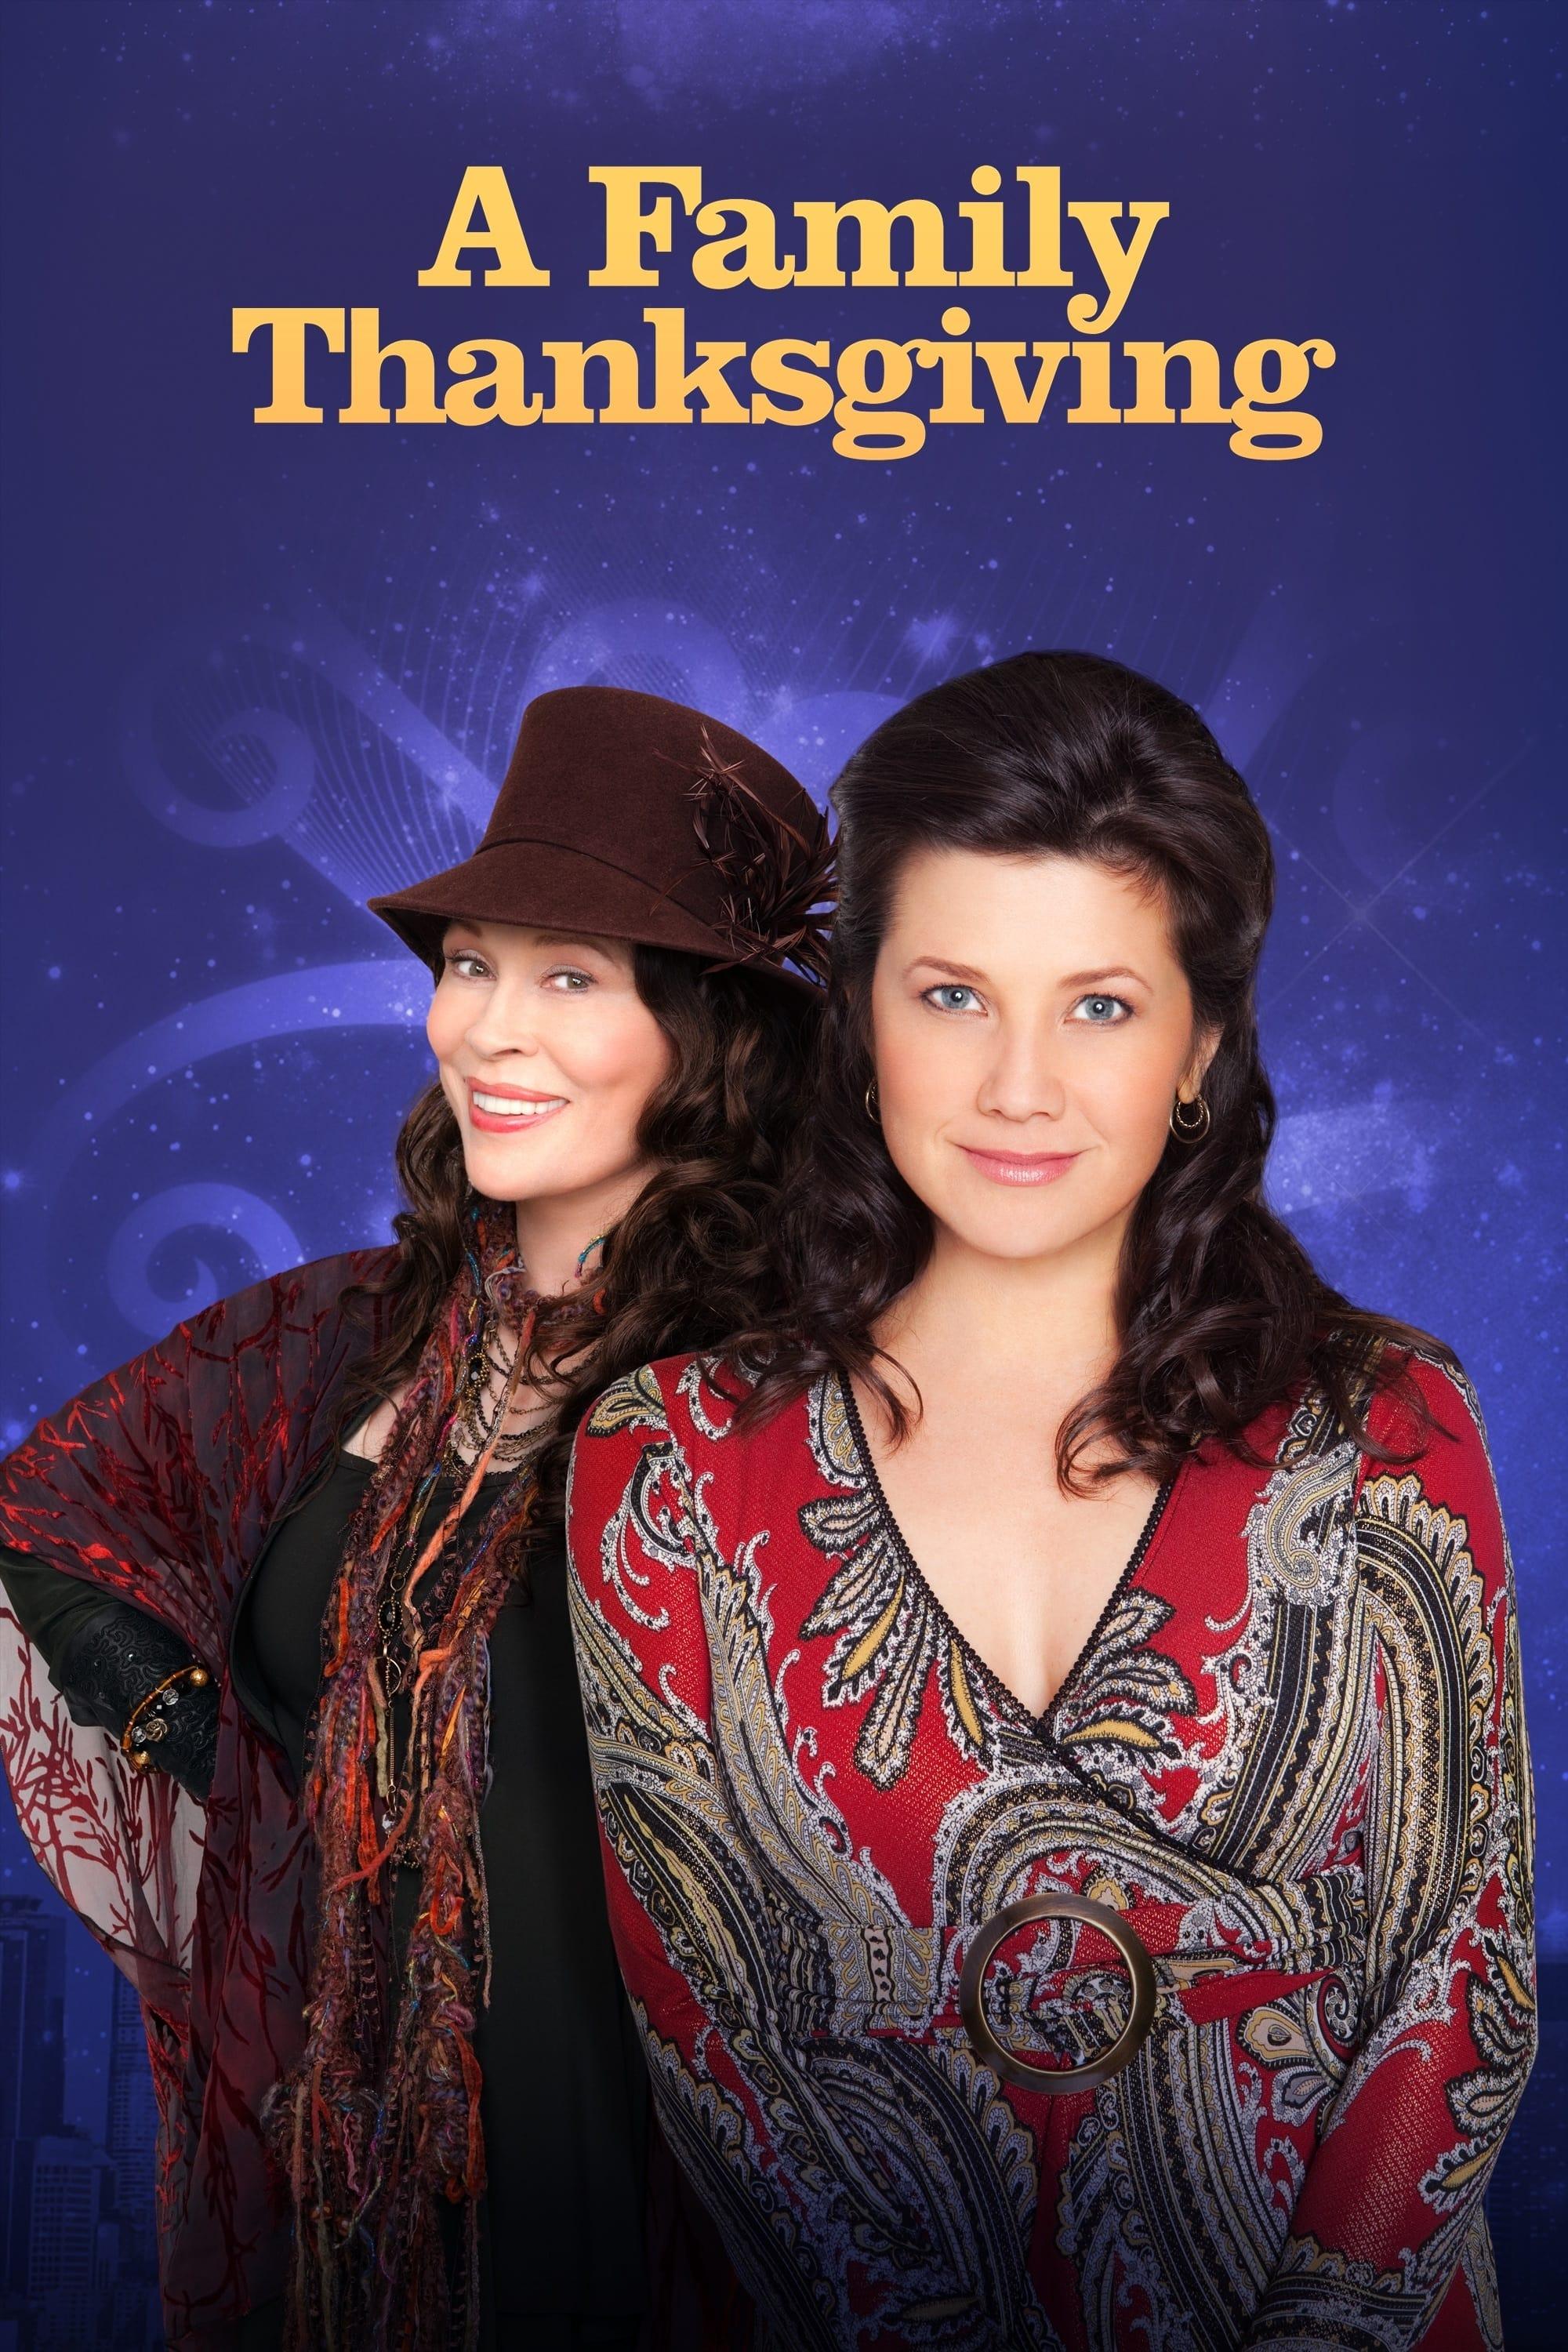 A Family Thanksgiving poster